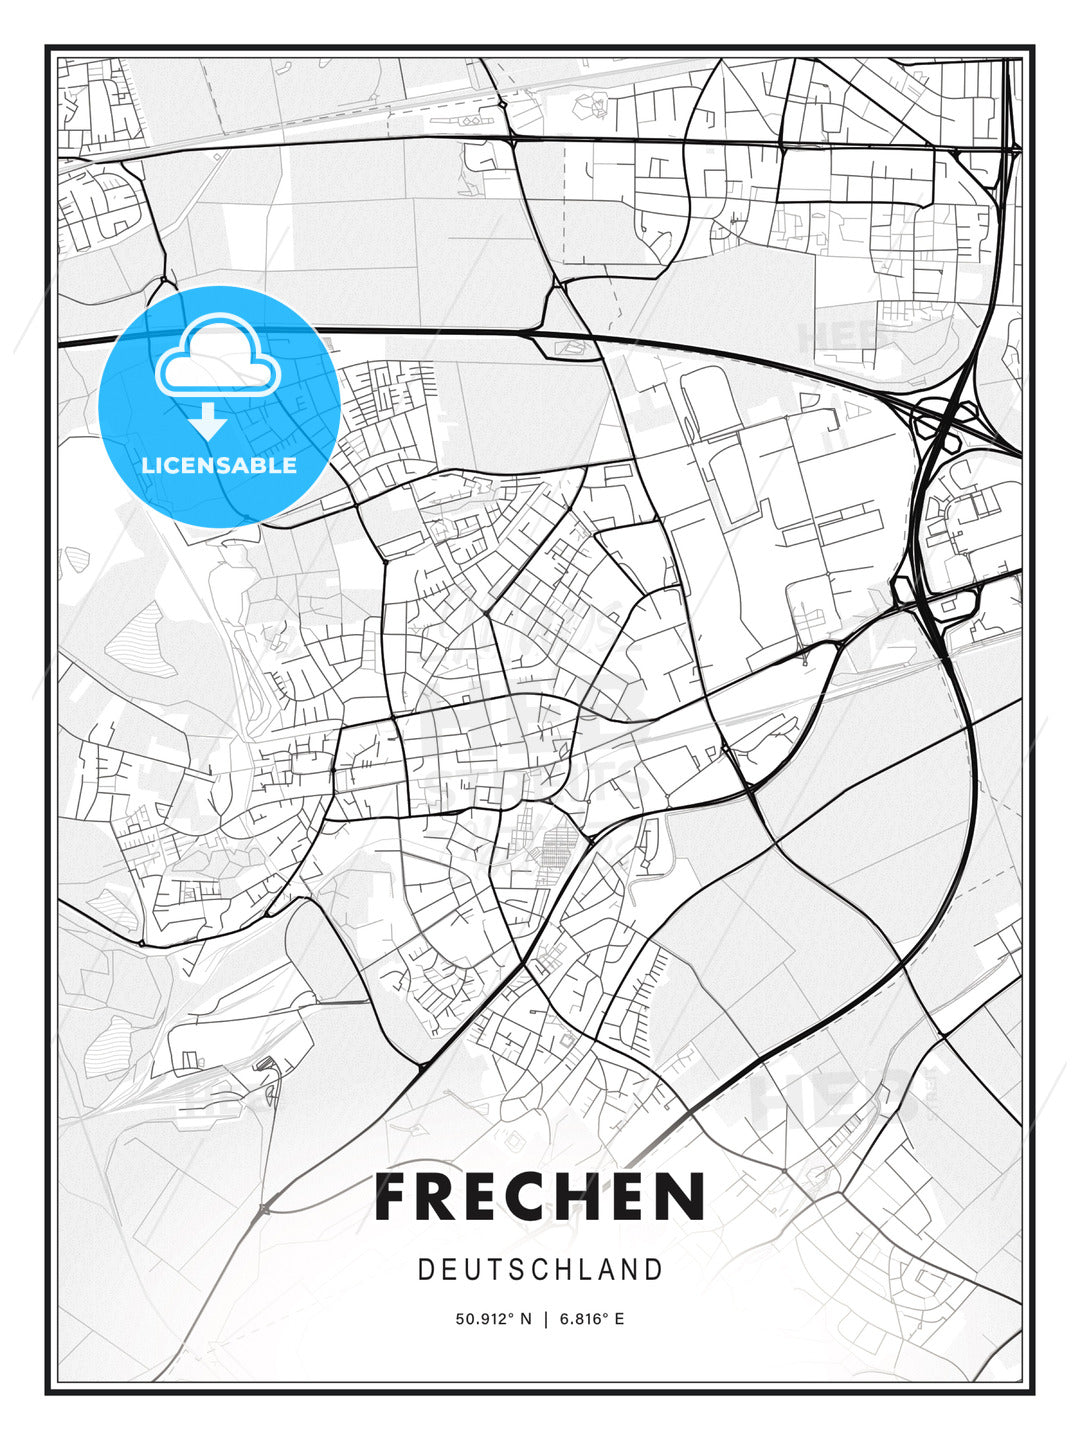 Frechen, Germany, Modern Print Template in Various Formats - HEBSTREITS Sketches